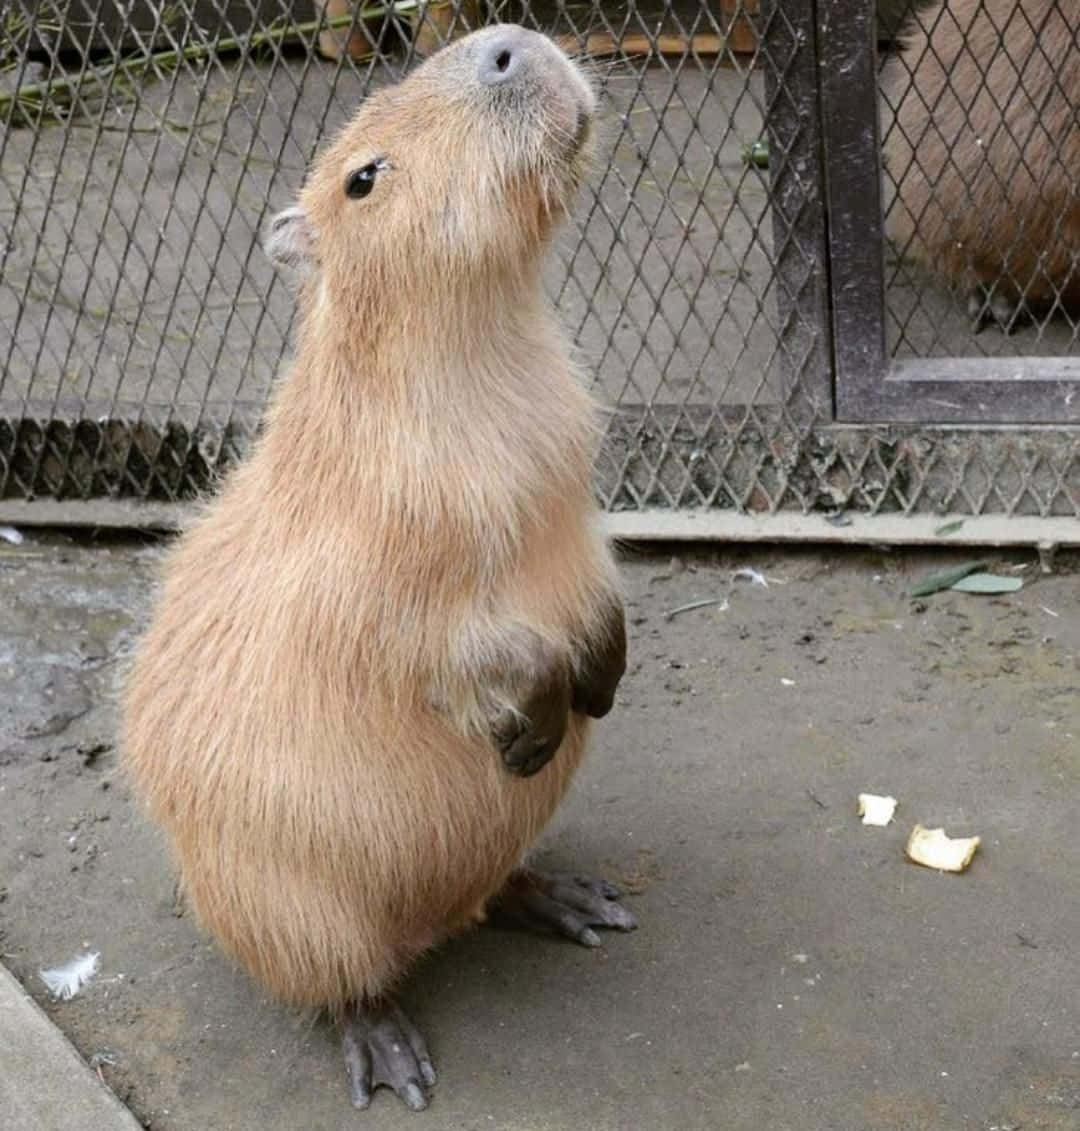 An adorable capybara relaxing in the wild and enjoying a sunny day.